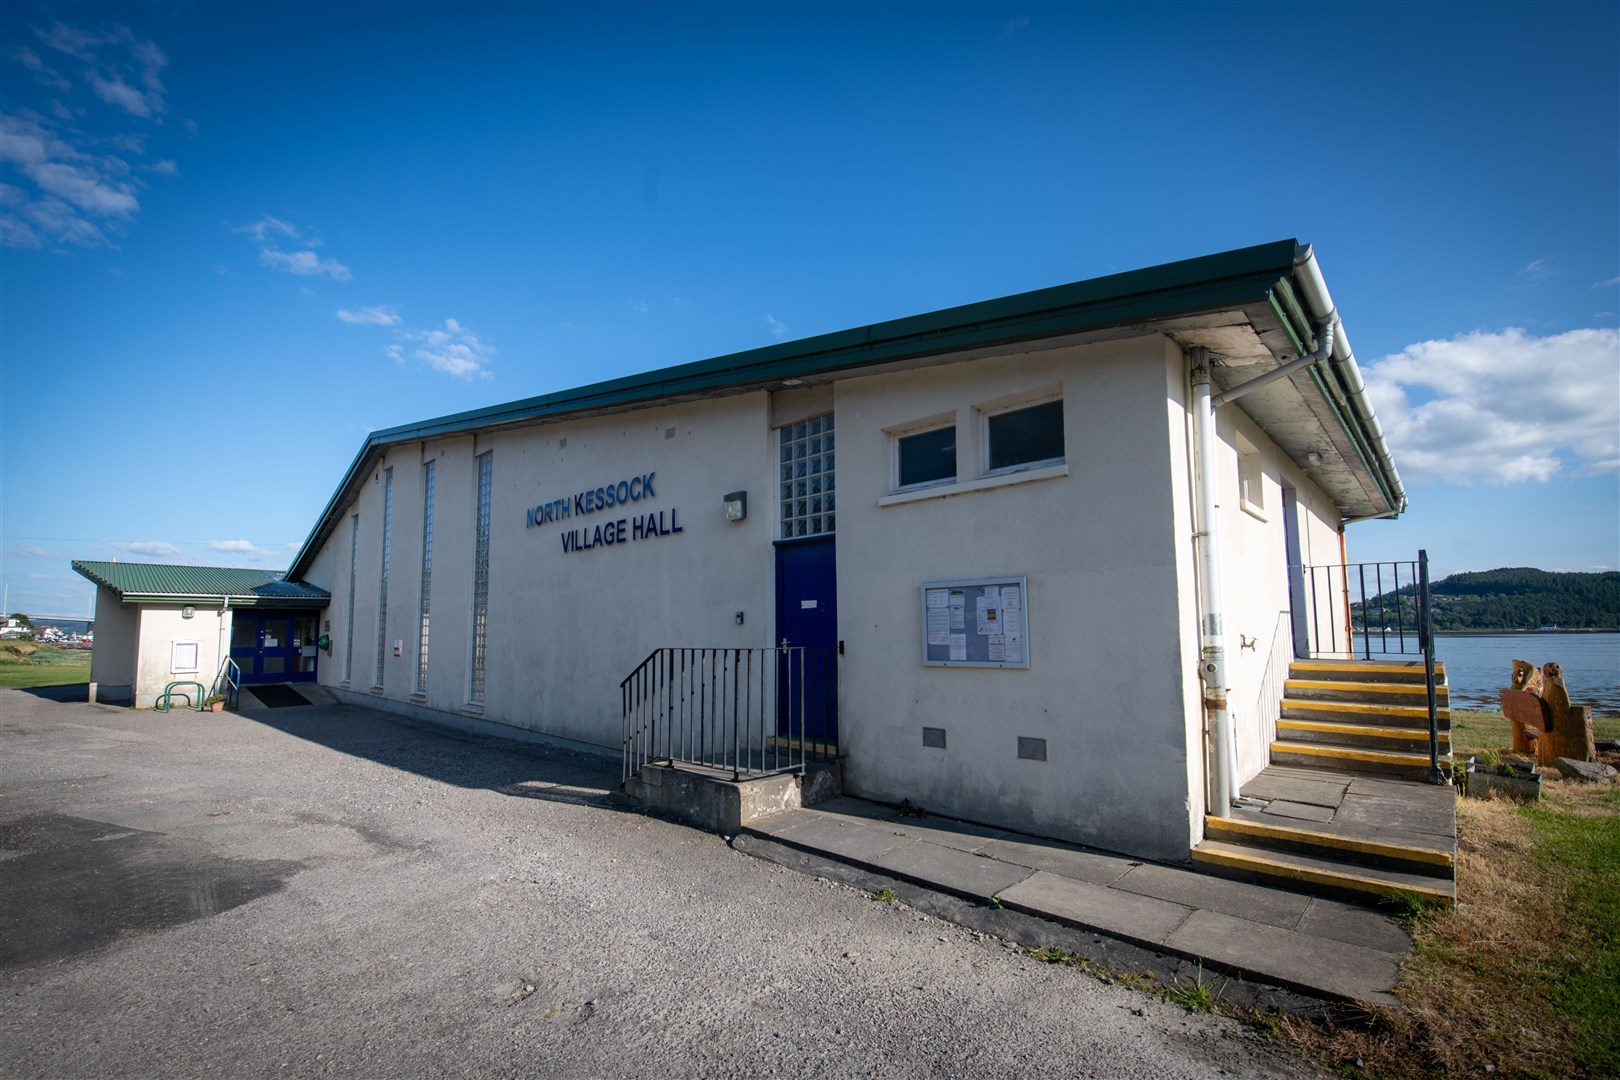 The committee hopes to extend the role of the North Kessock Village Hall, attracting more touring theatre productions for the village to enjoy. Picture: Callum Mackay